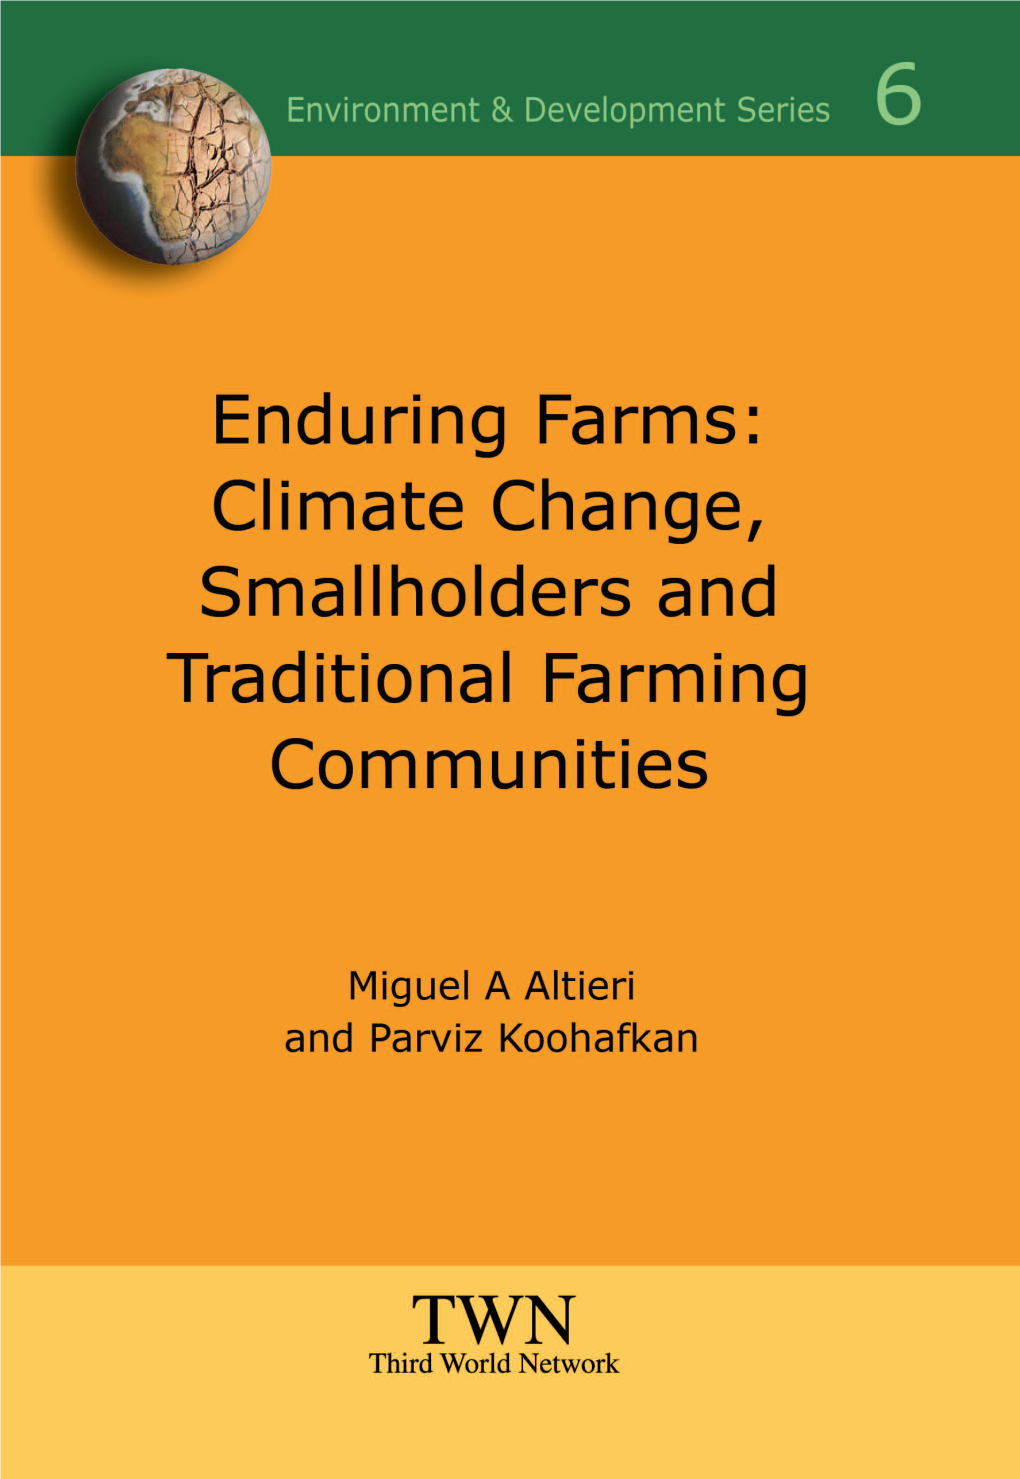 Enduring Farms: Climate Change, Smallholders and Traditional Farming Communities